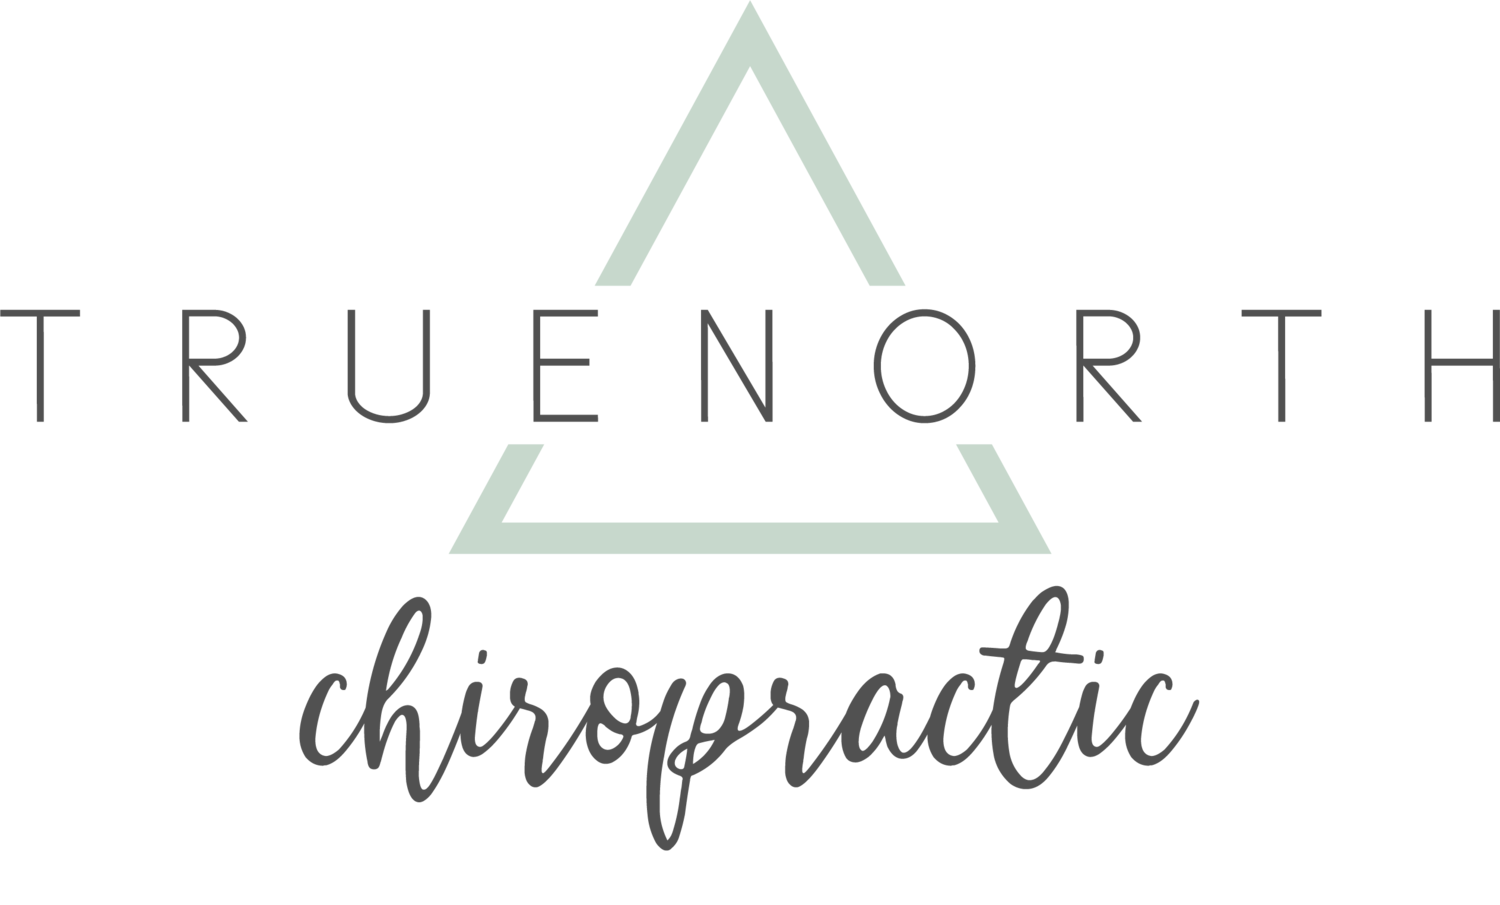 TrueNorth Chiropractic - Natural Health Care For The Whole Family